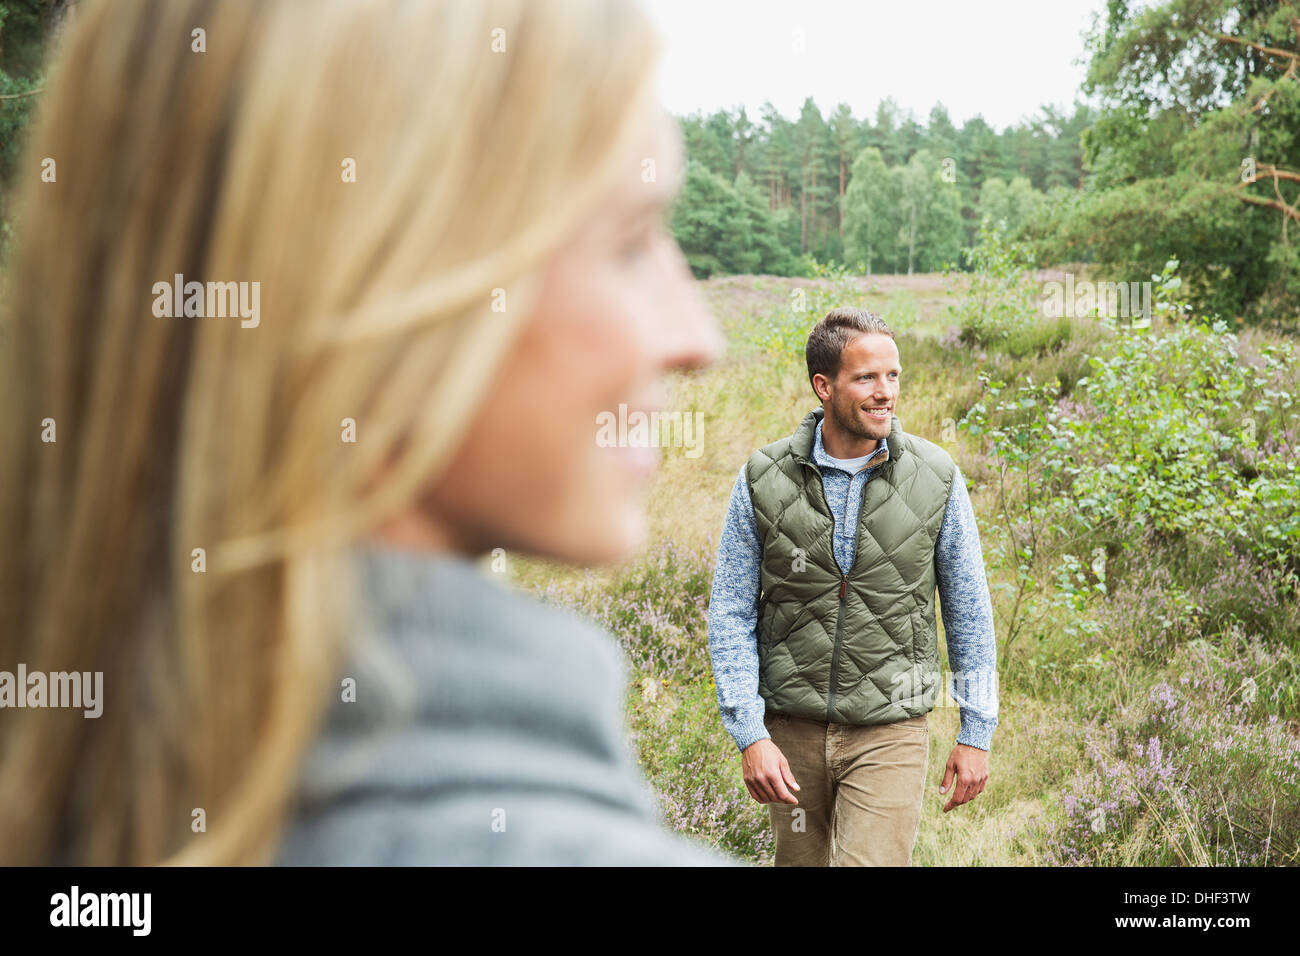 Mid adult man looking away, woman blurred in foreground Stock Photo